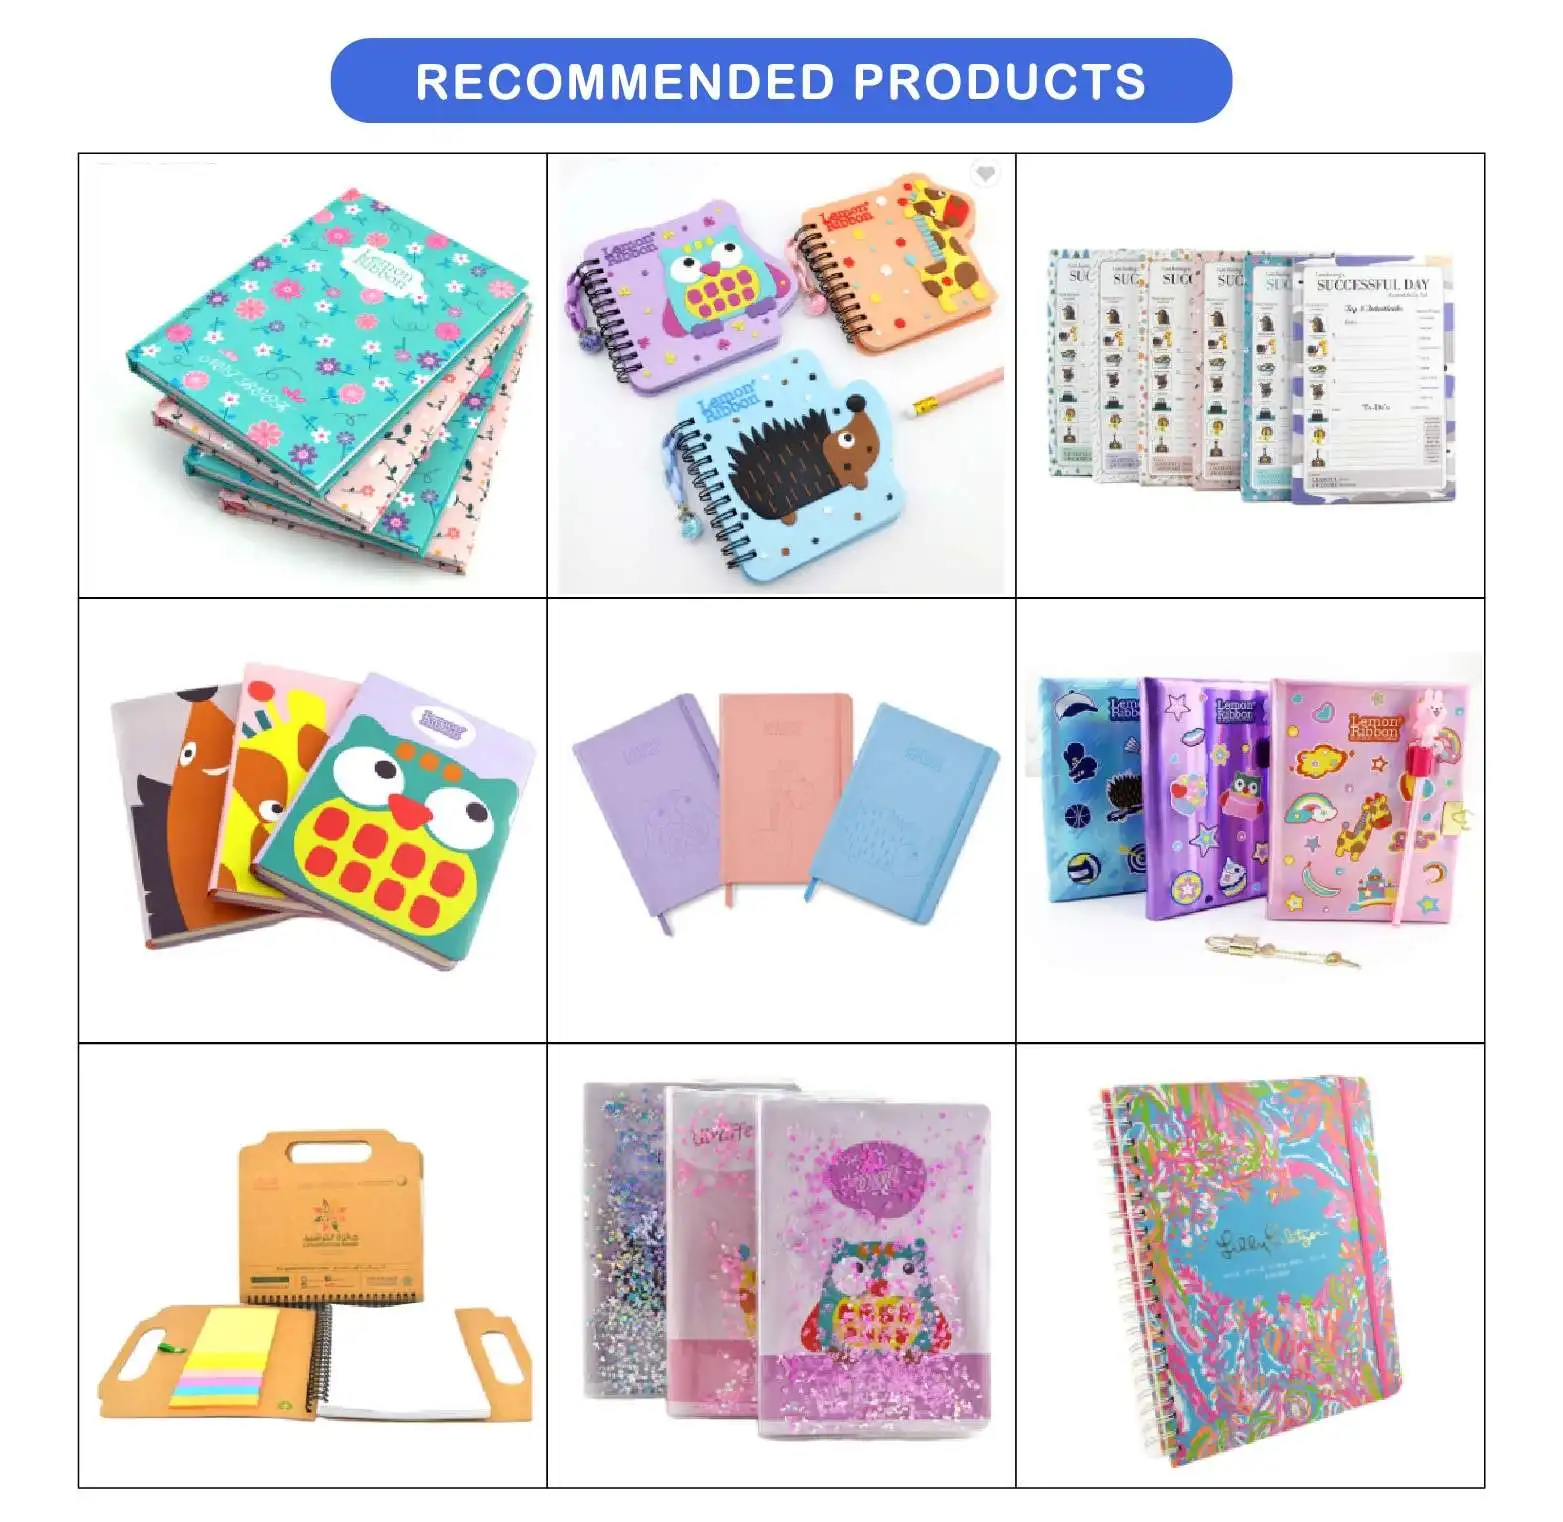 Stationery&Gift Supplier trusted by Disney Hebe7bb3de104476b8ca273ddbf975121s